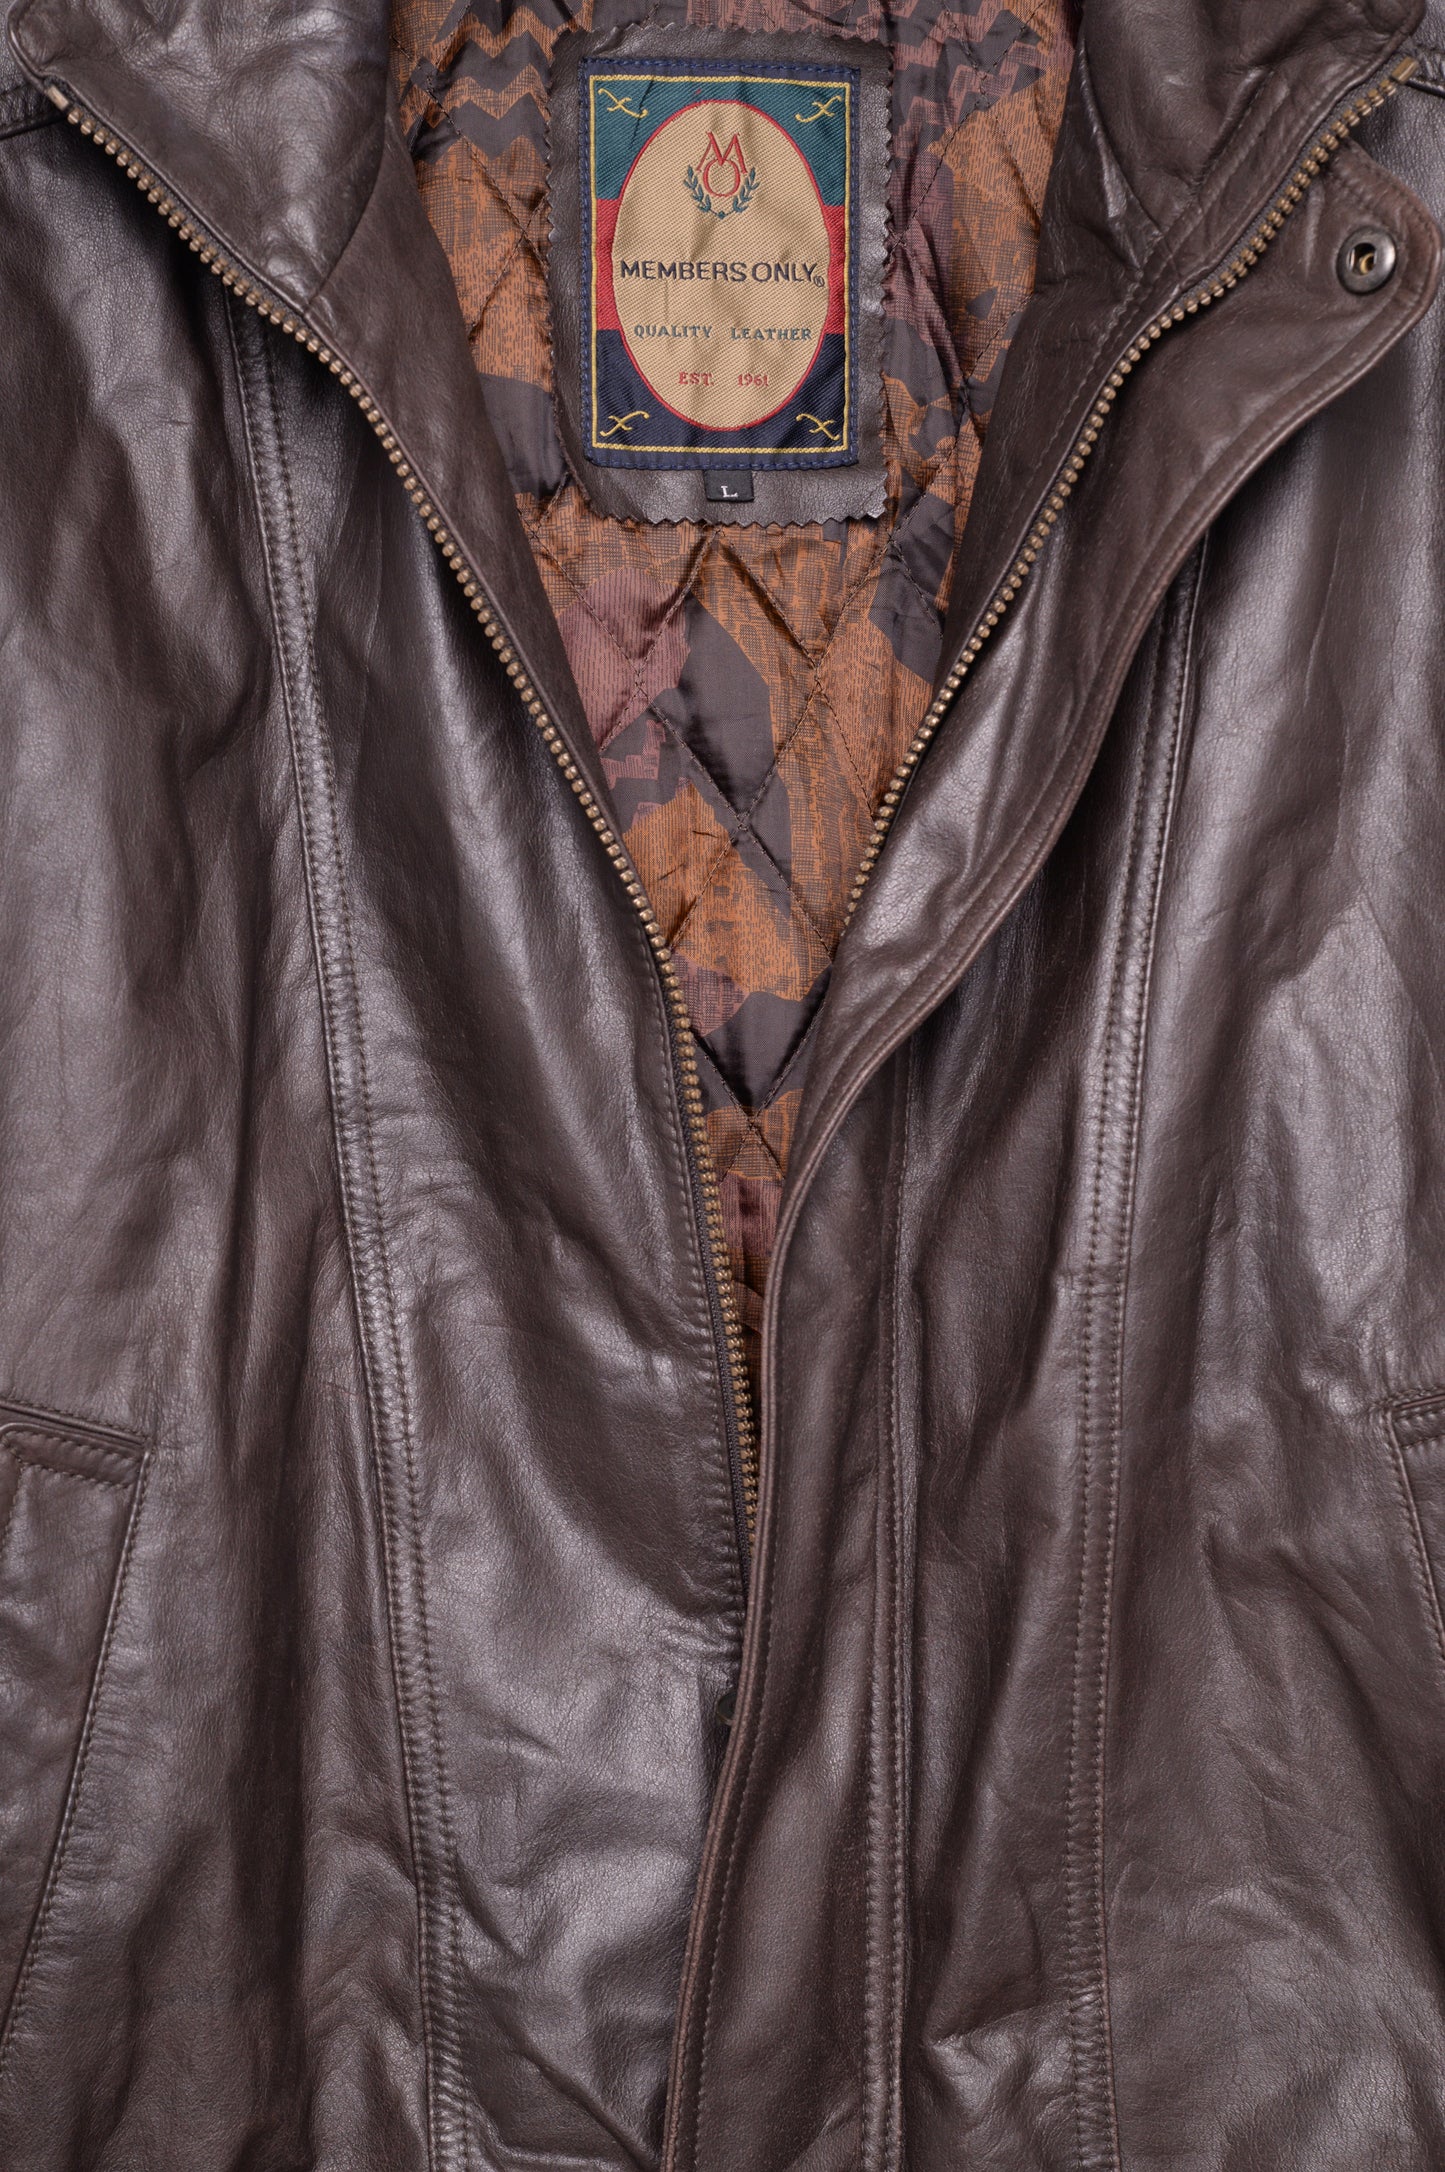 Member's Only Leather Bomber Jacket